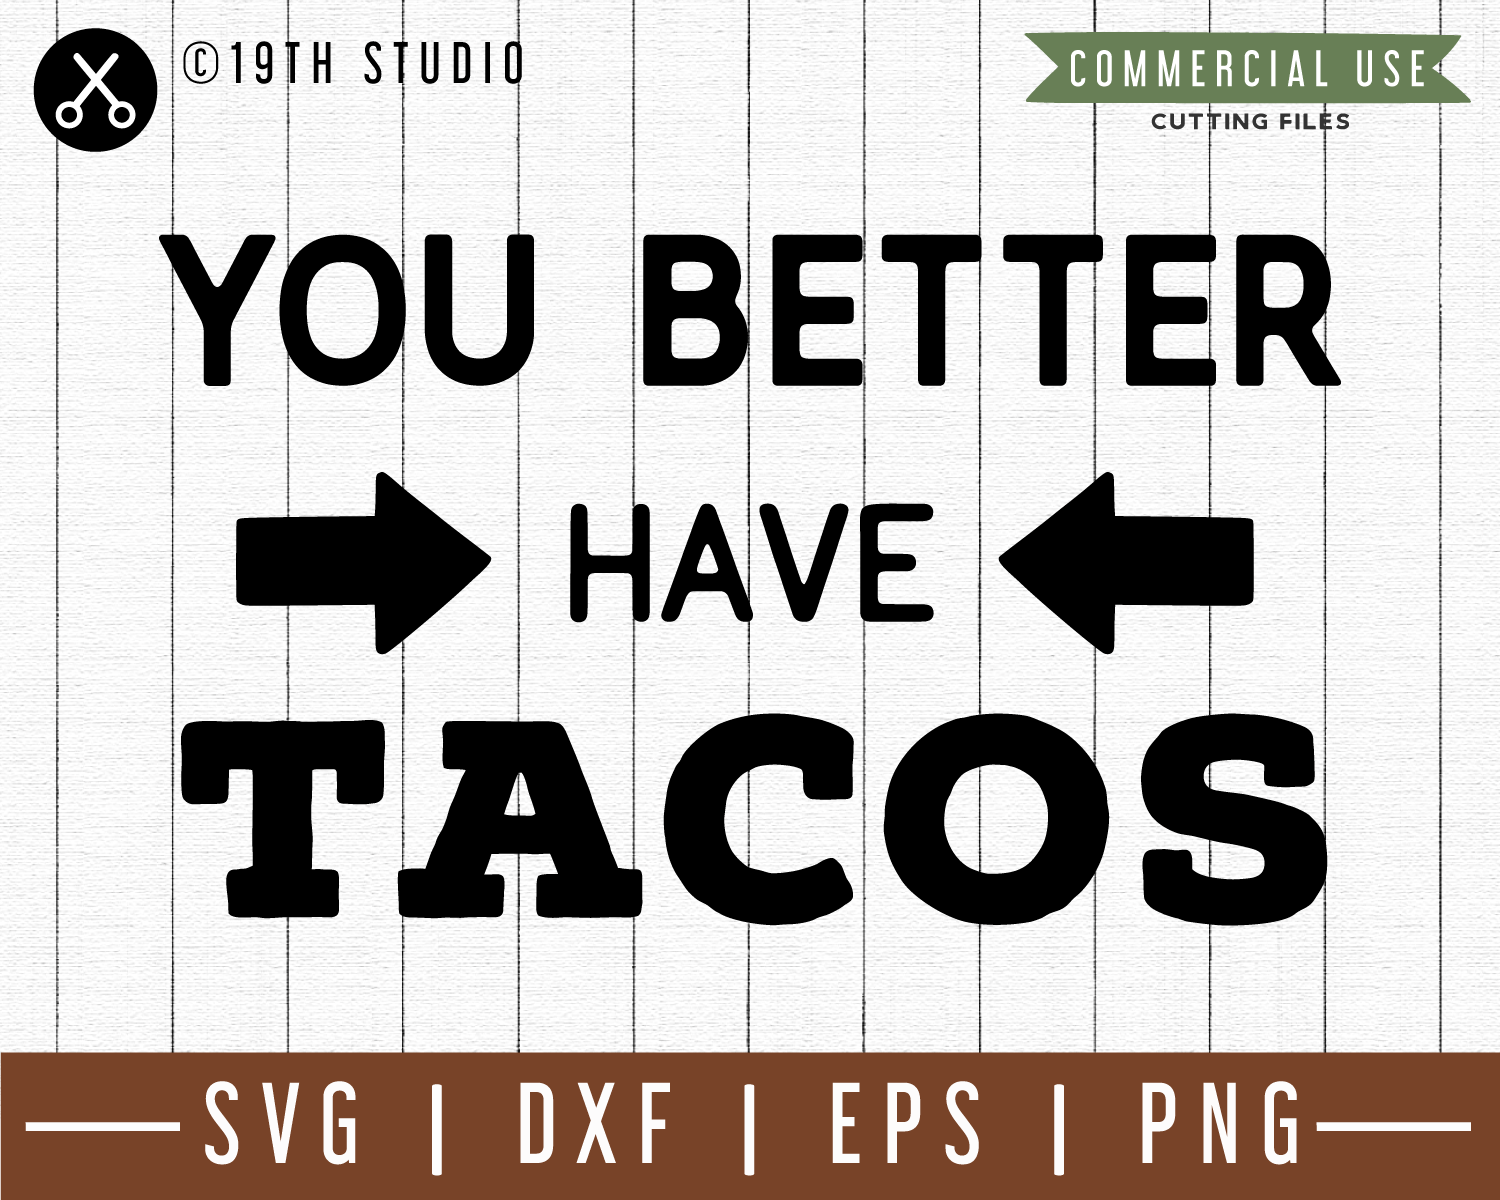 You better have tacos SVG |M49F| A Doormat SVG file Craft House SVG - SVG files for Cricut and Silhouette